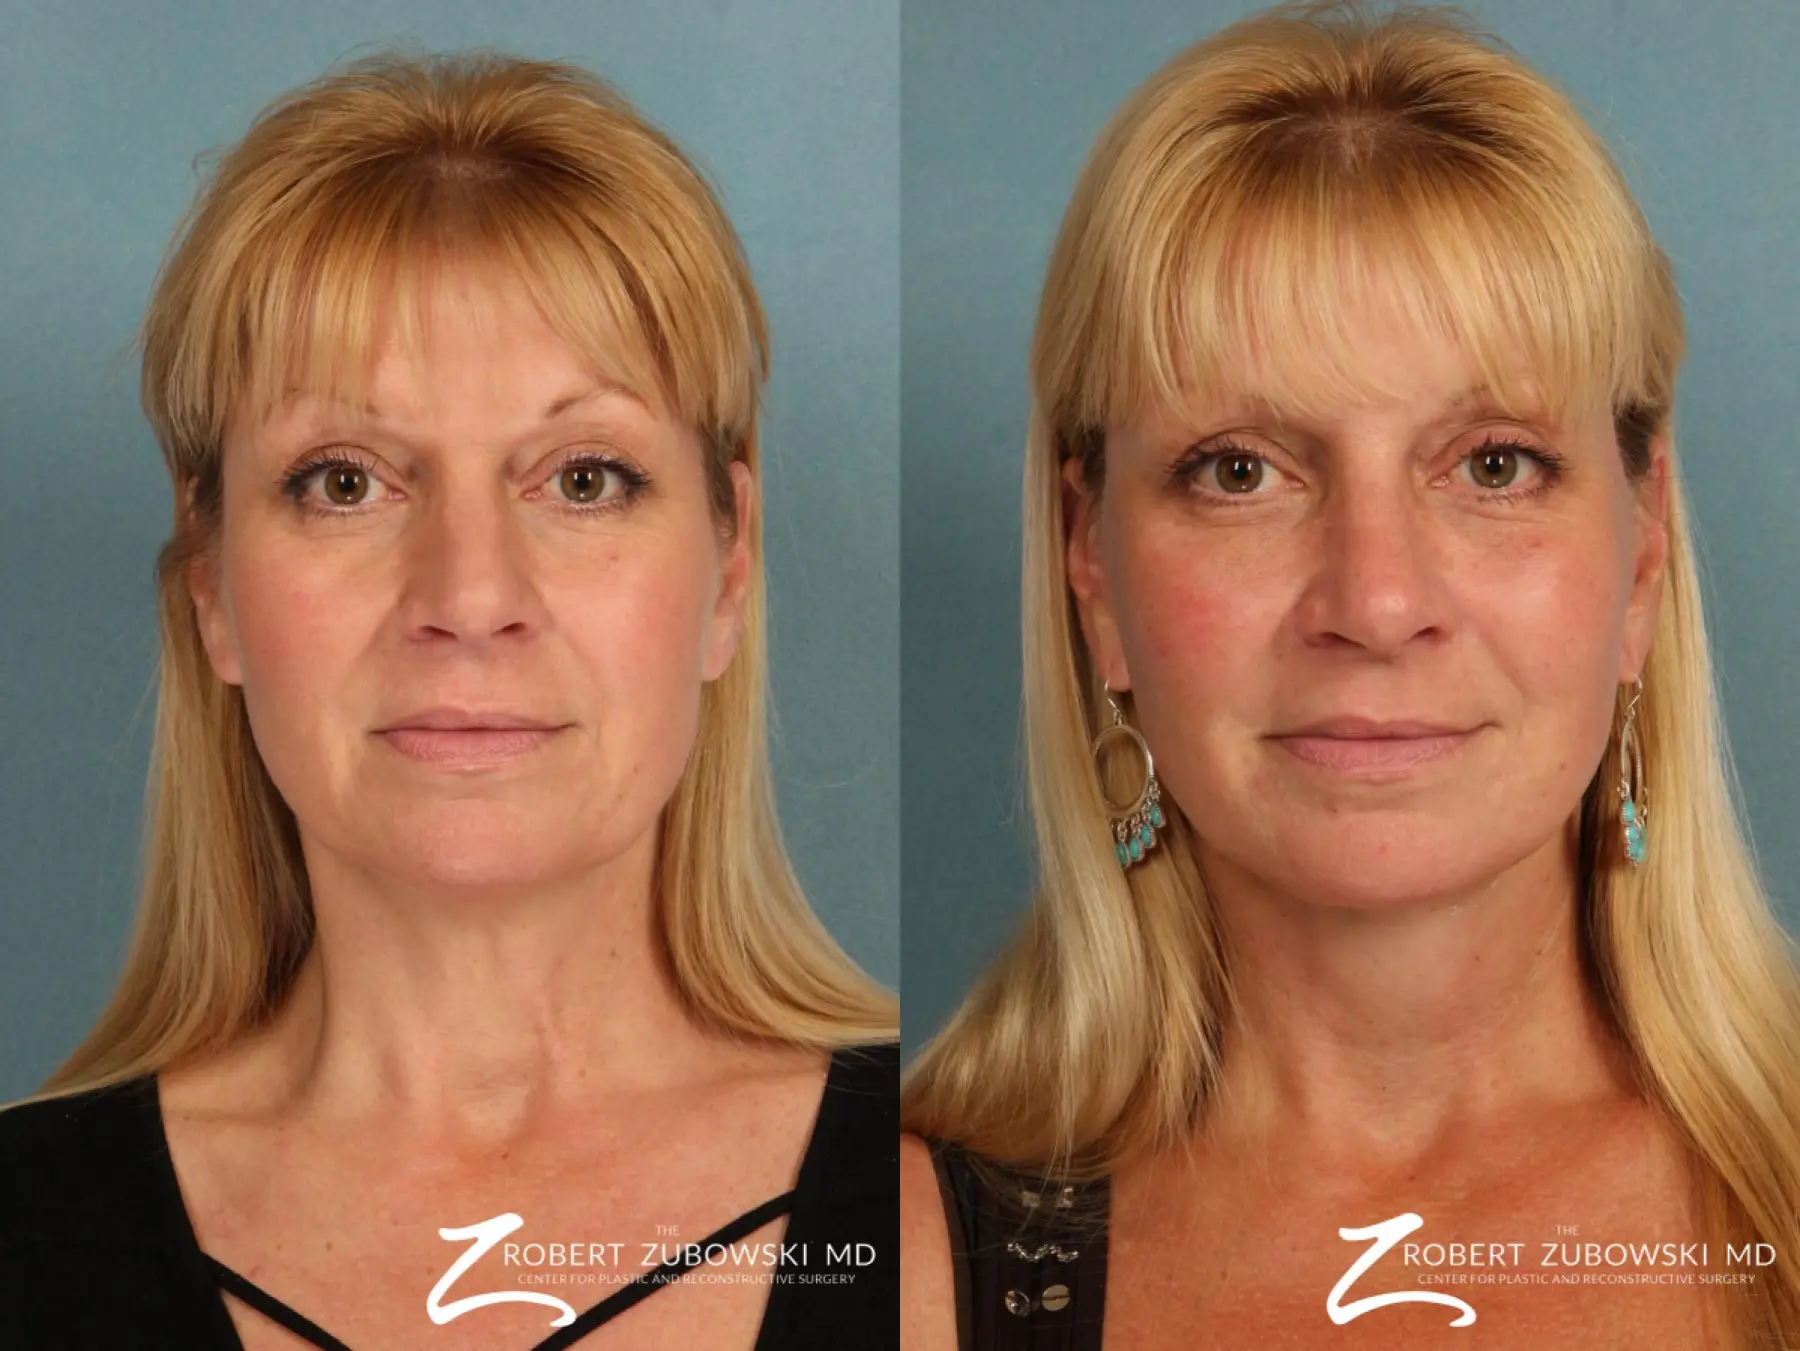 Facelift: Patient 5 - Before and After 1